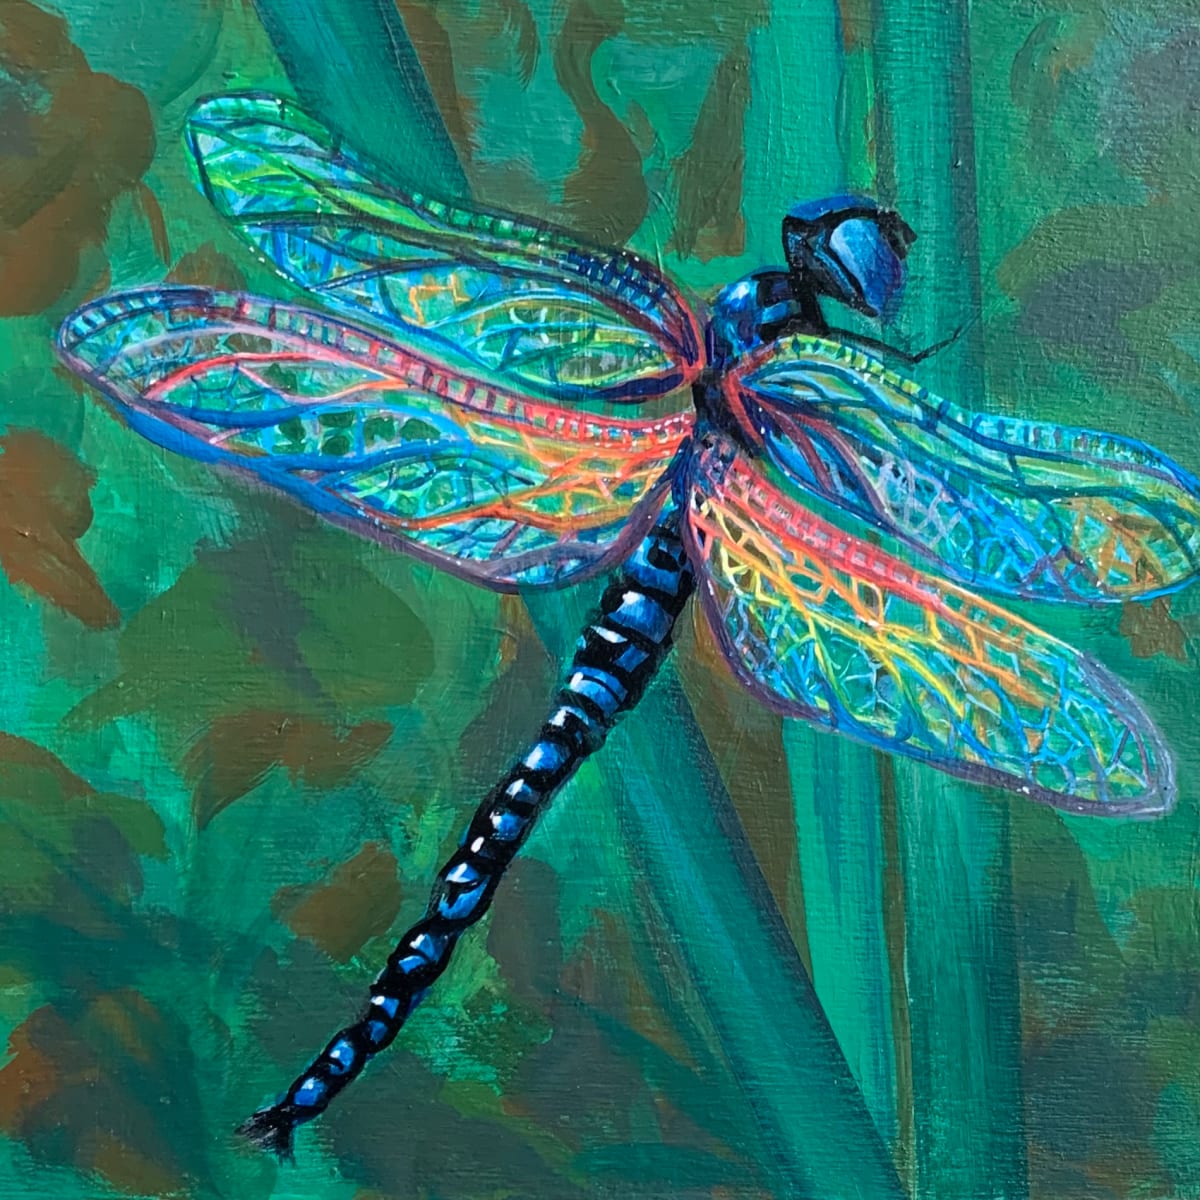 untitled dragonfly by Chelsea Davis 